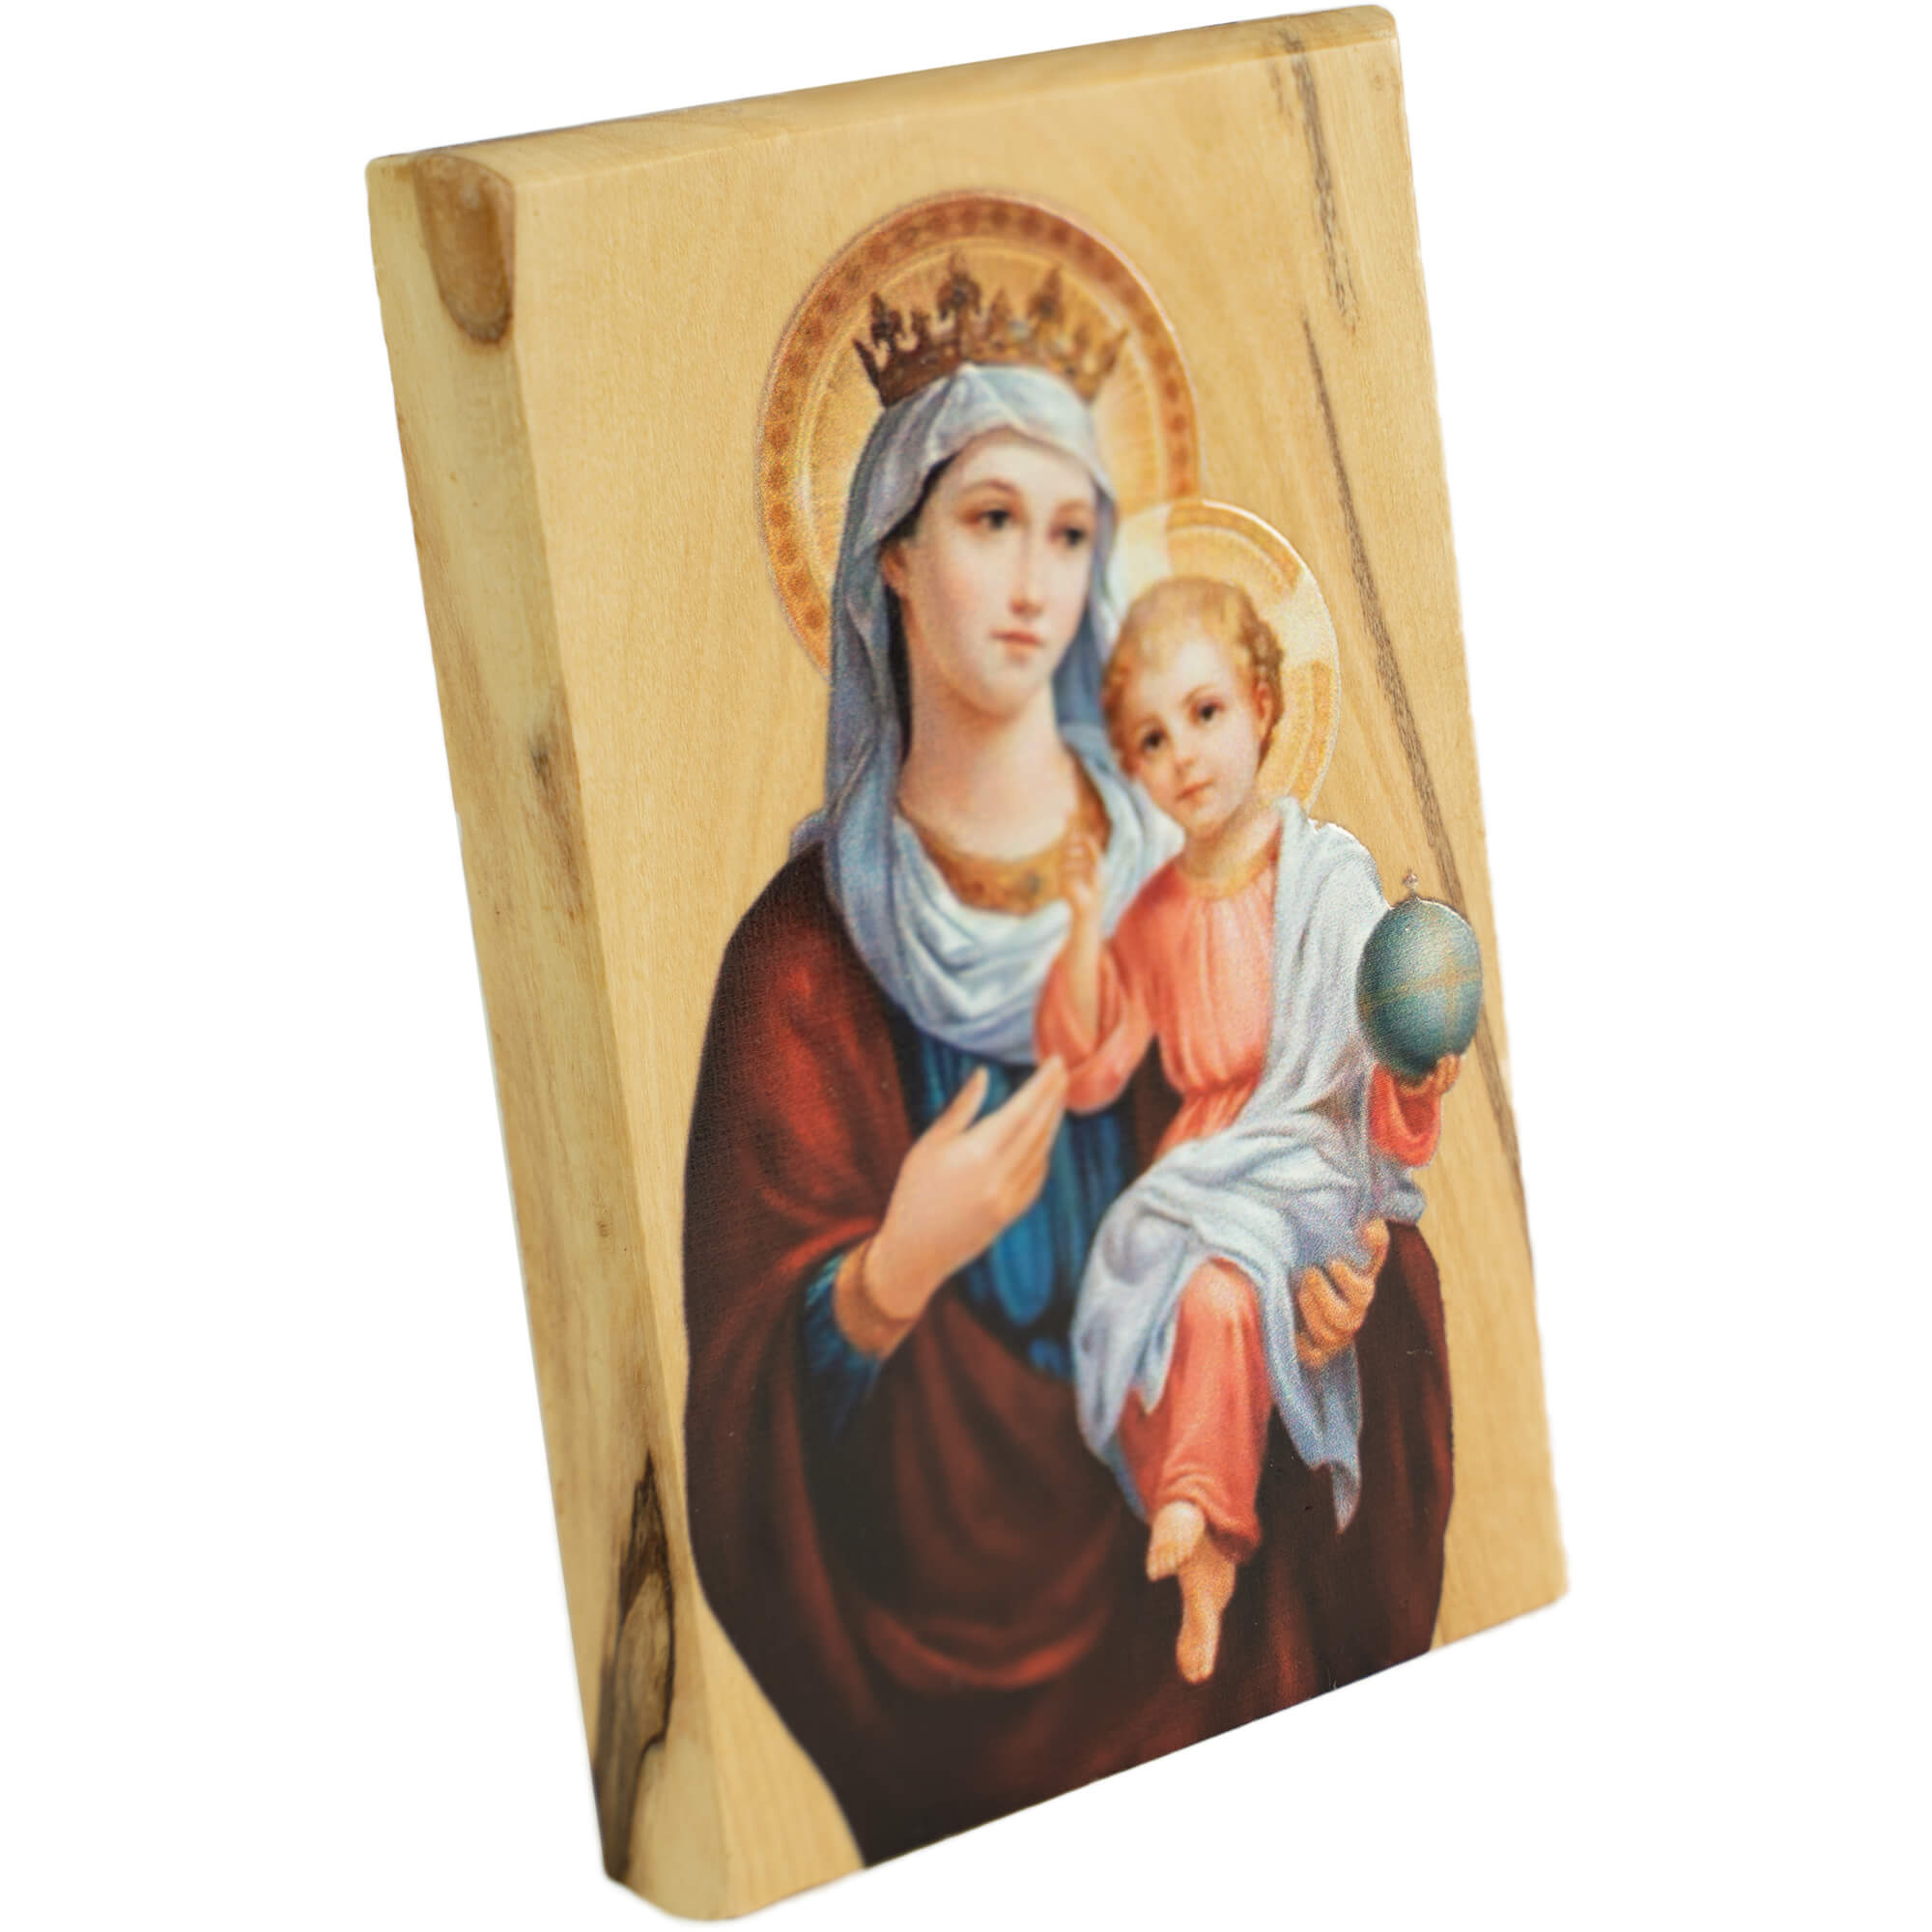 Virgin Mary Queen of Heaven, Full Color Olive Wood Icon from Israel